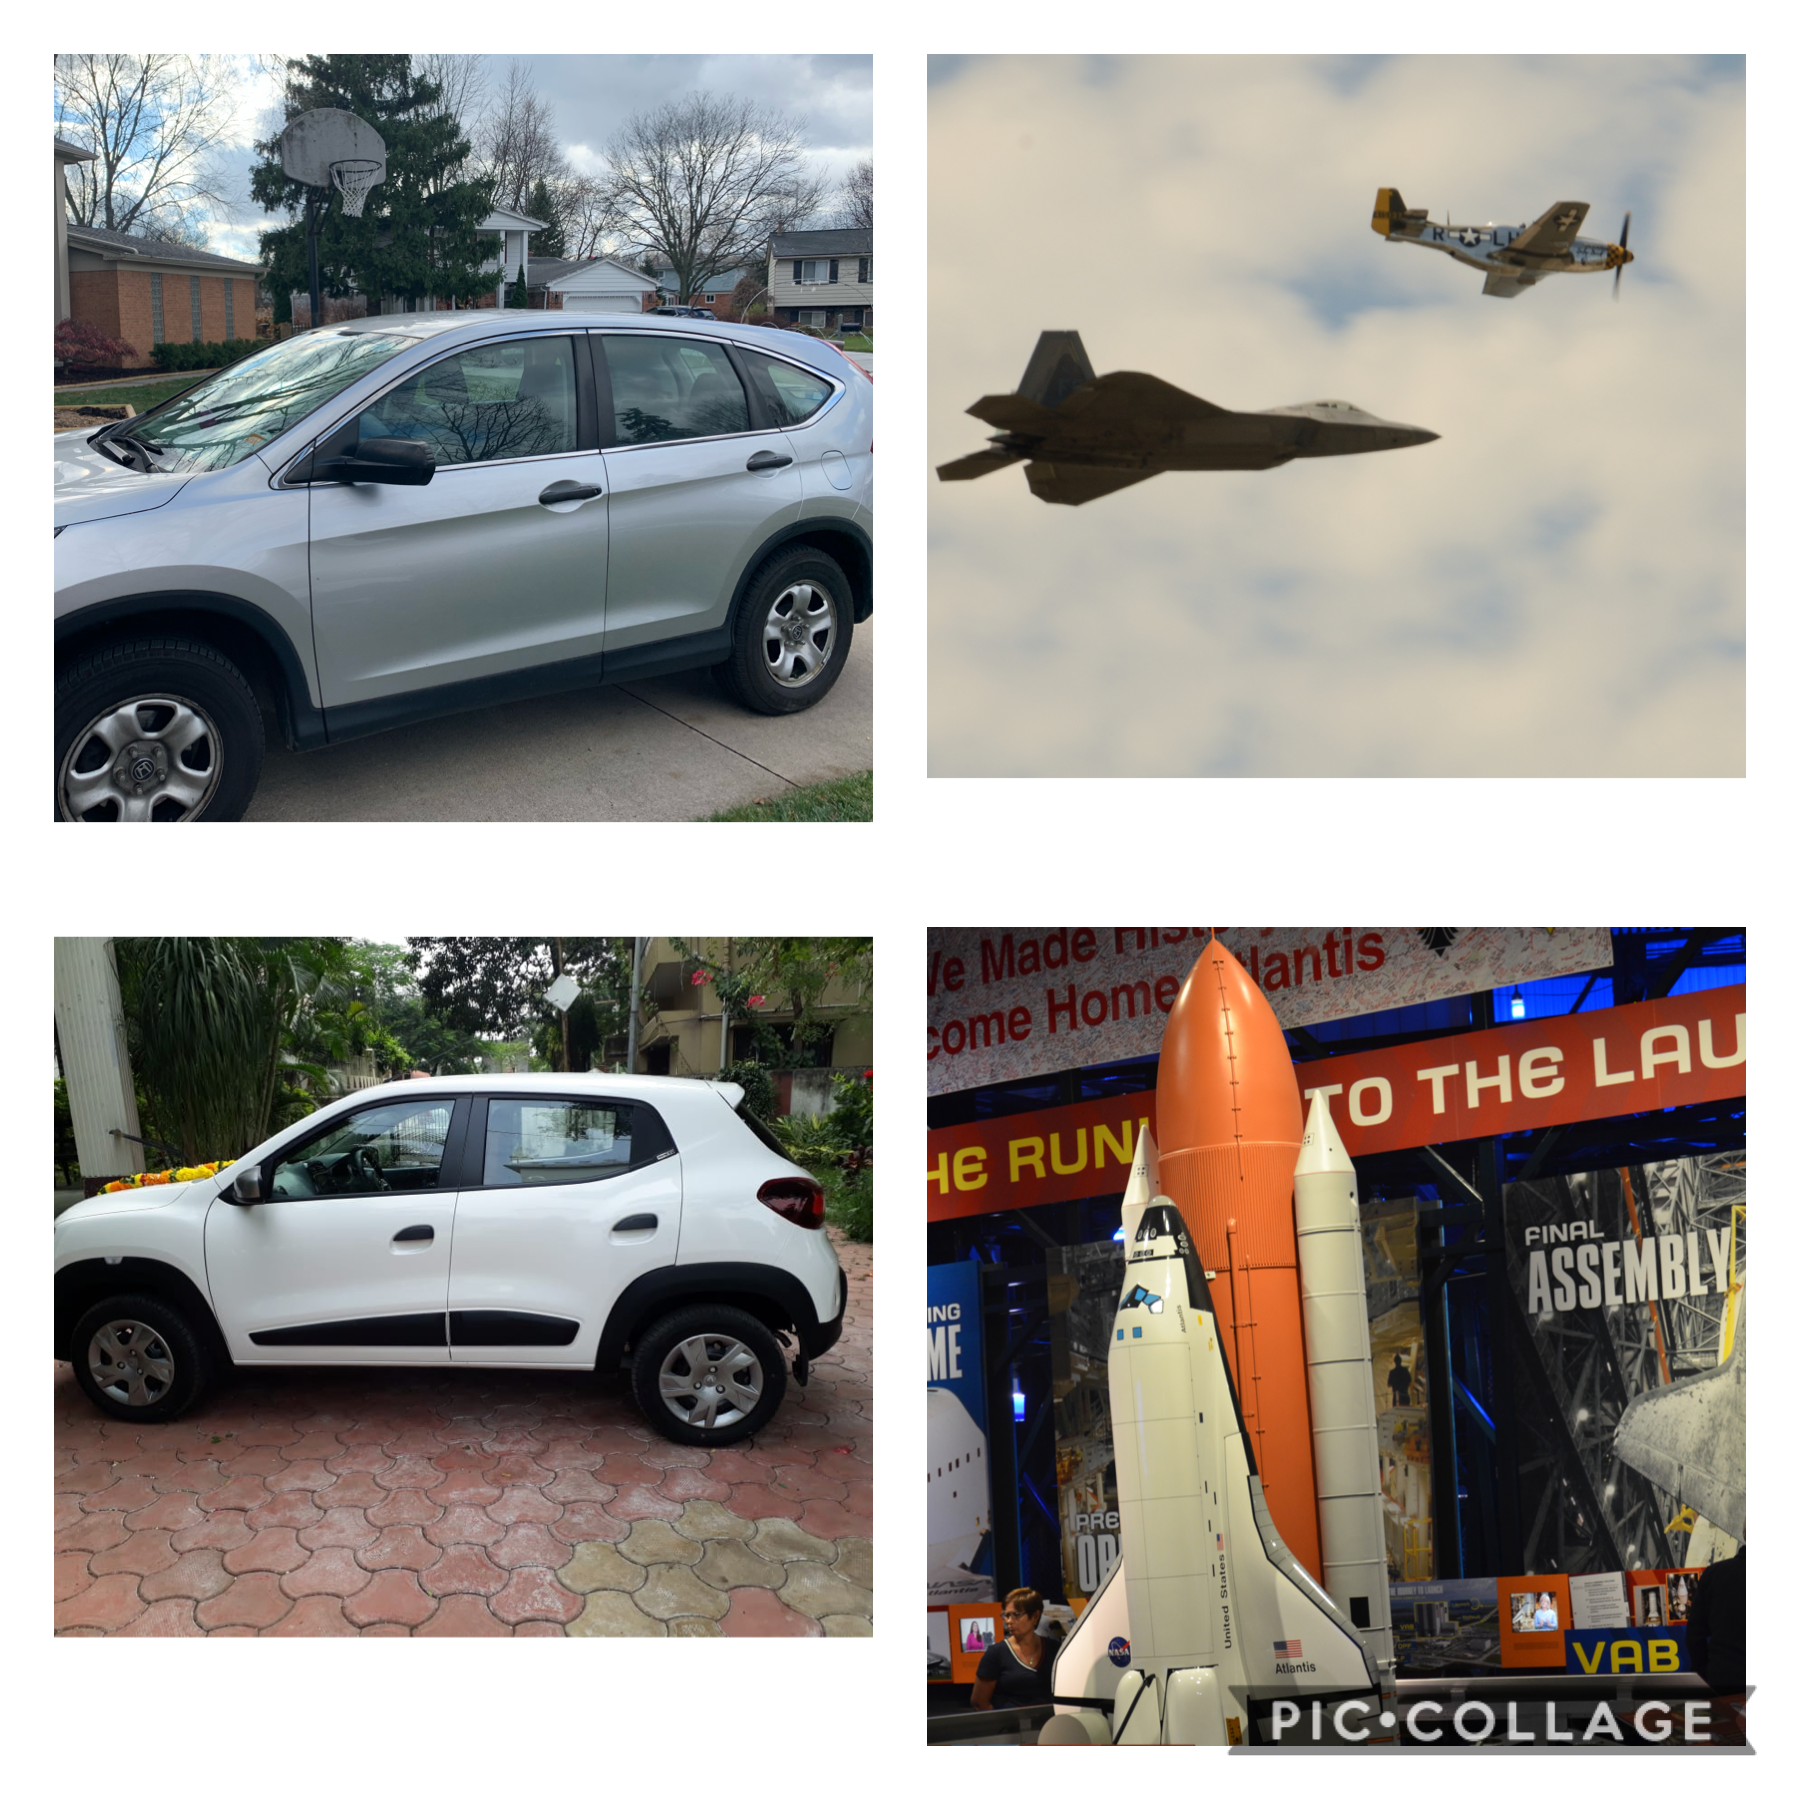 Collage of Cars and Airplanes in 2020